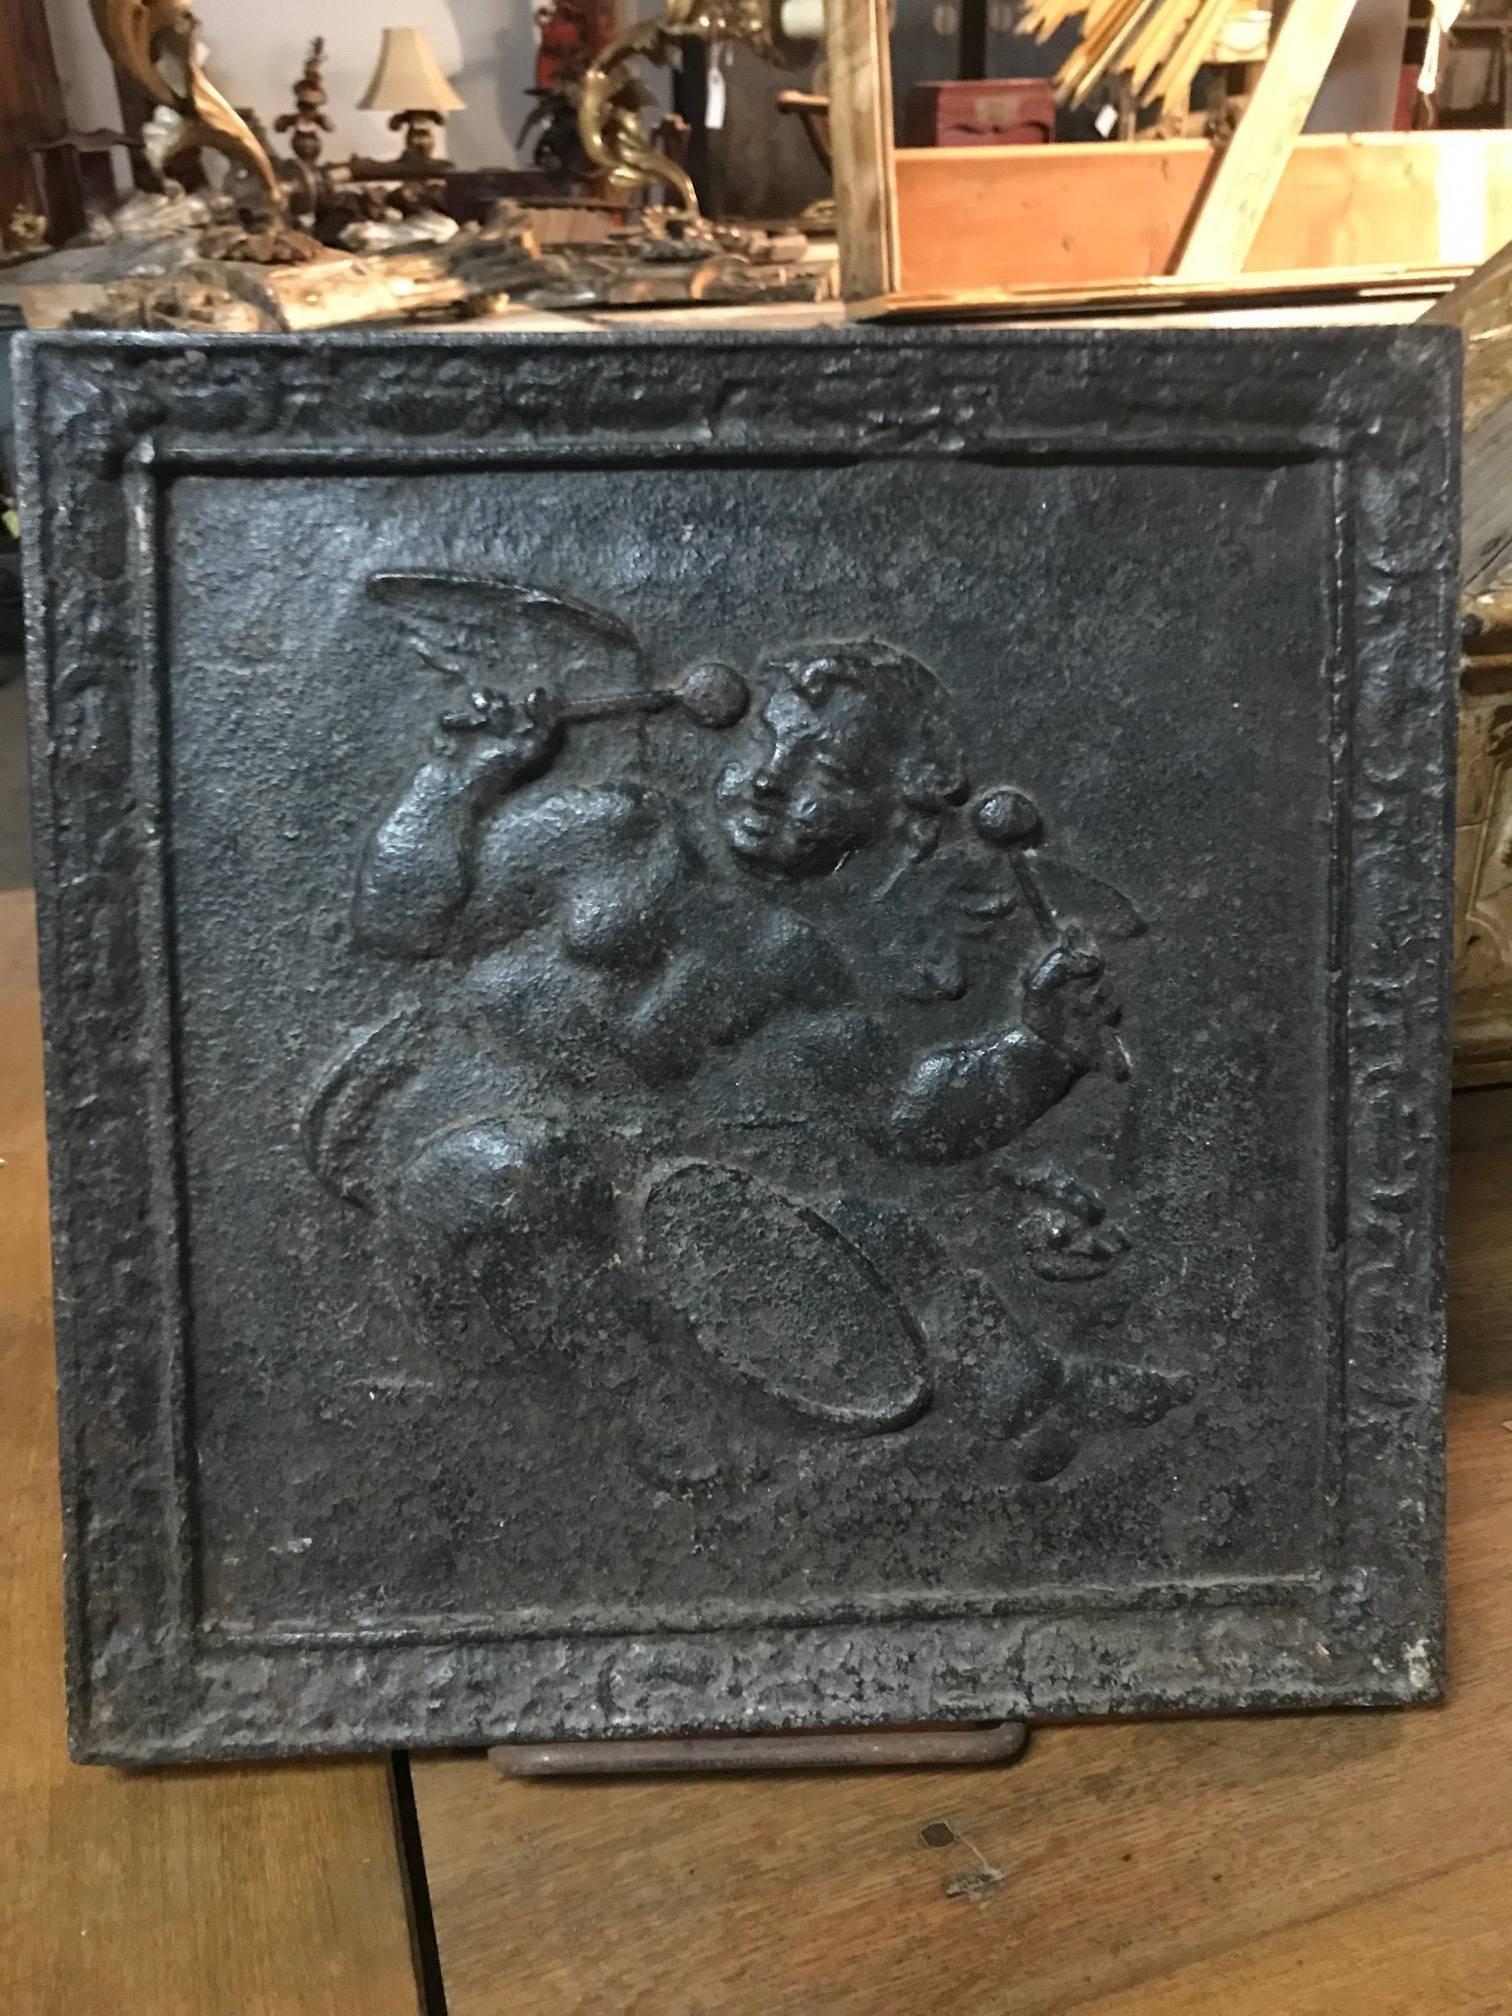 A very charming diminutive cast iron fireback from France. A wonderful motif of a cherub or putti playing the drum.